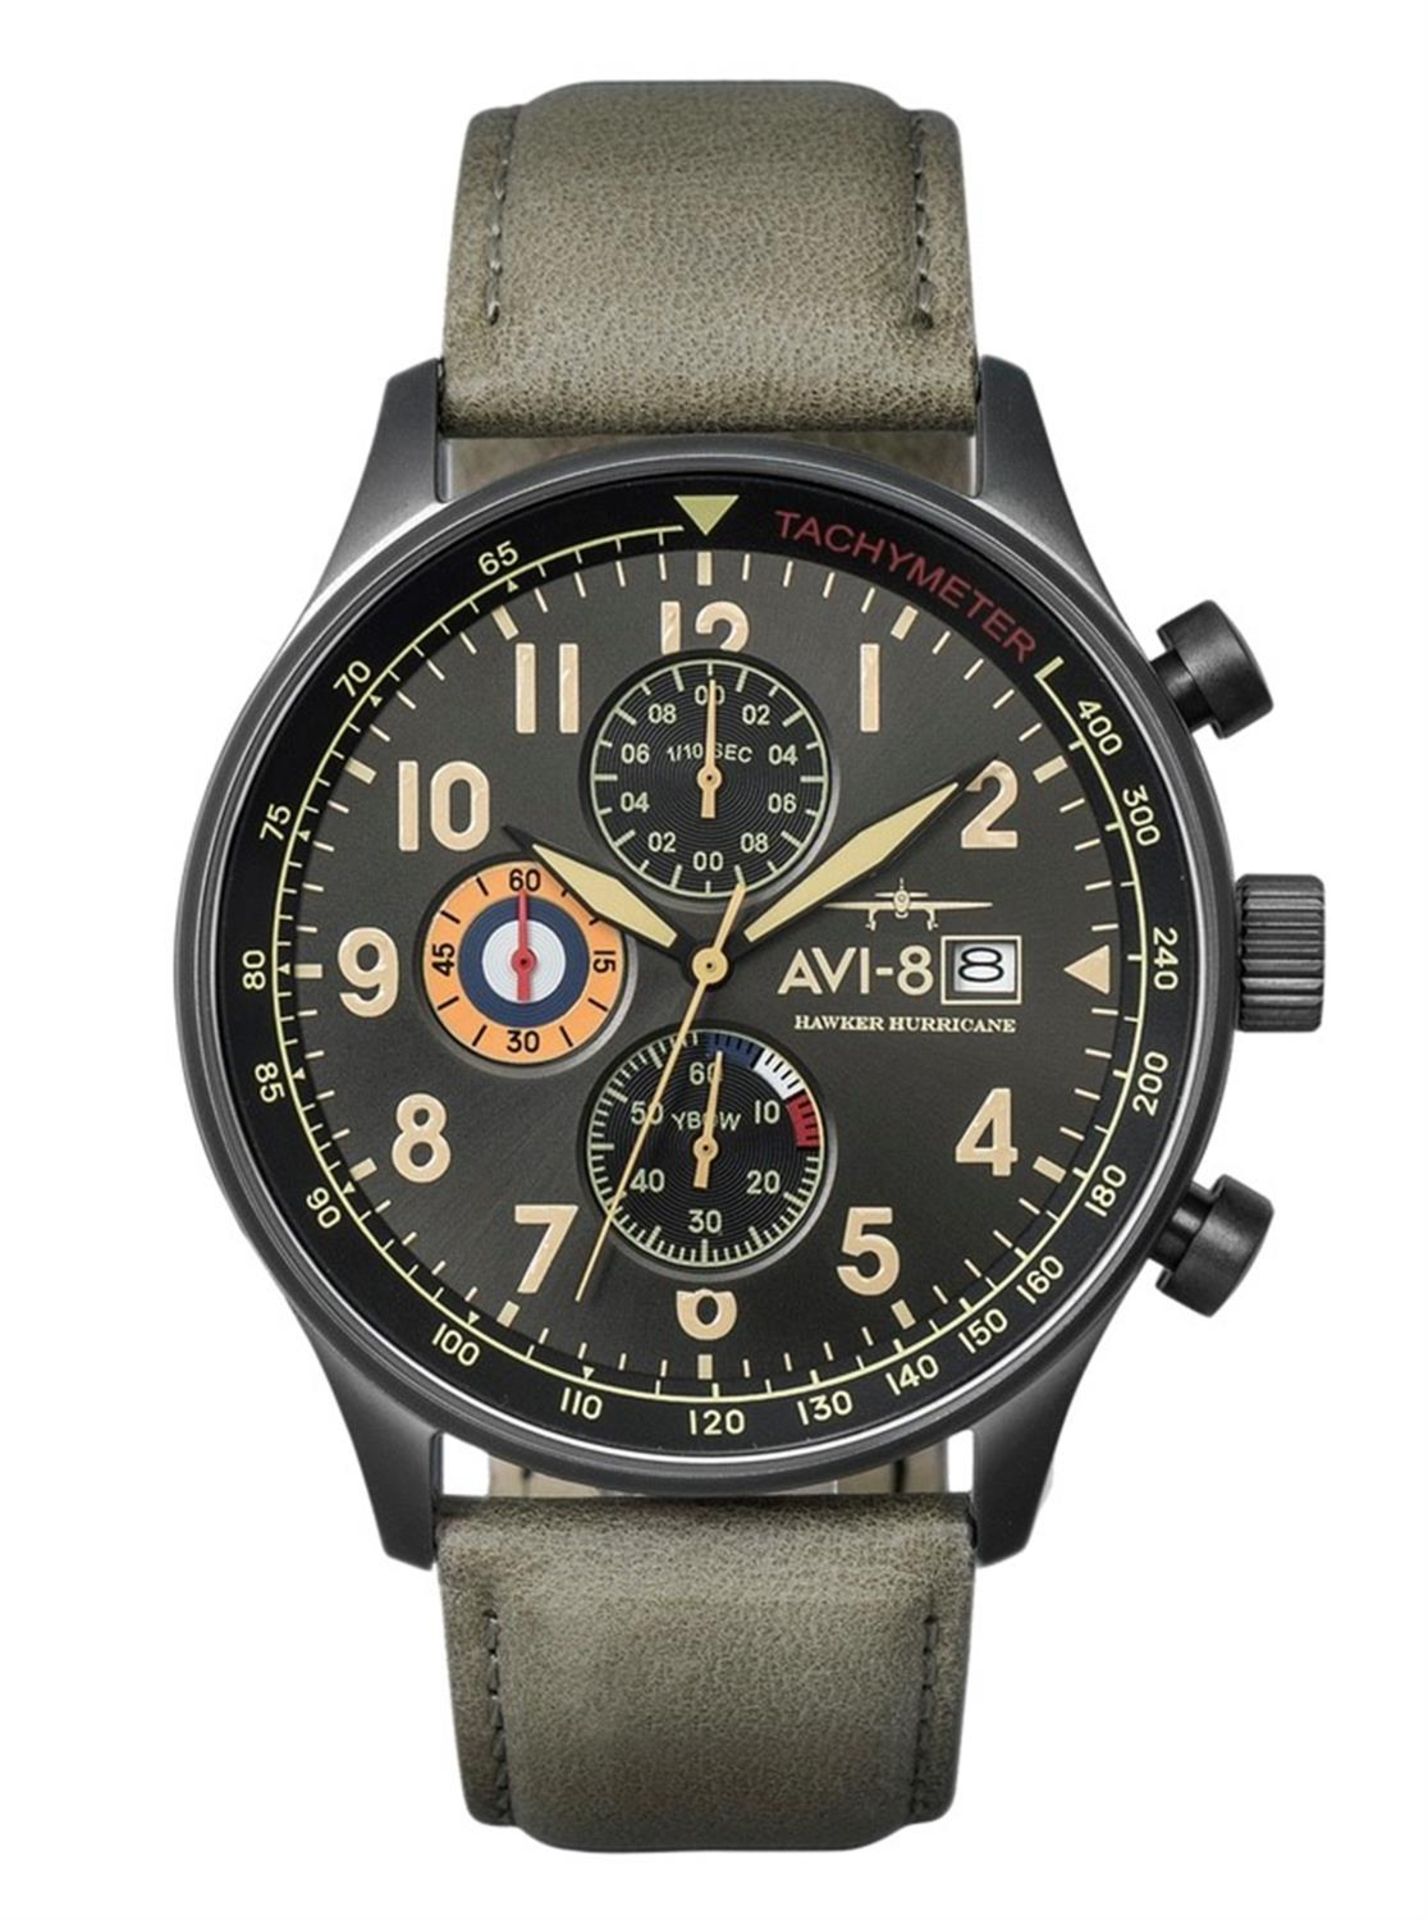 Classic Chronograph, an Homage to the Hawker Hurricane